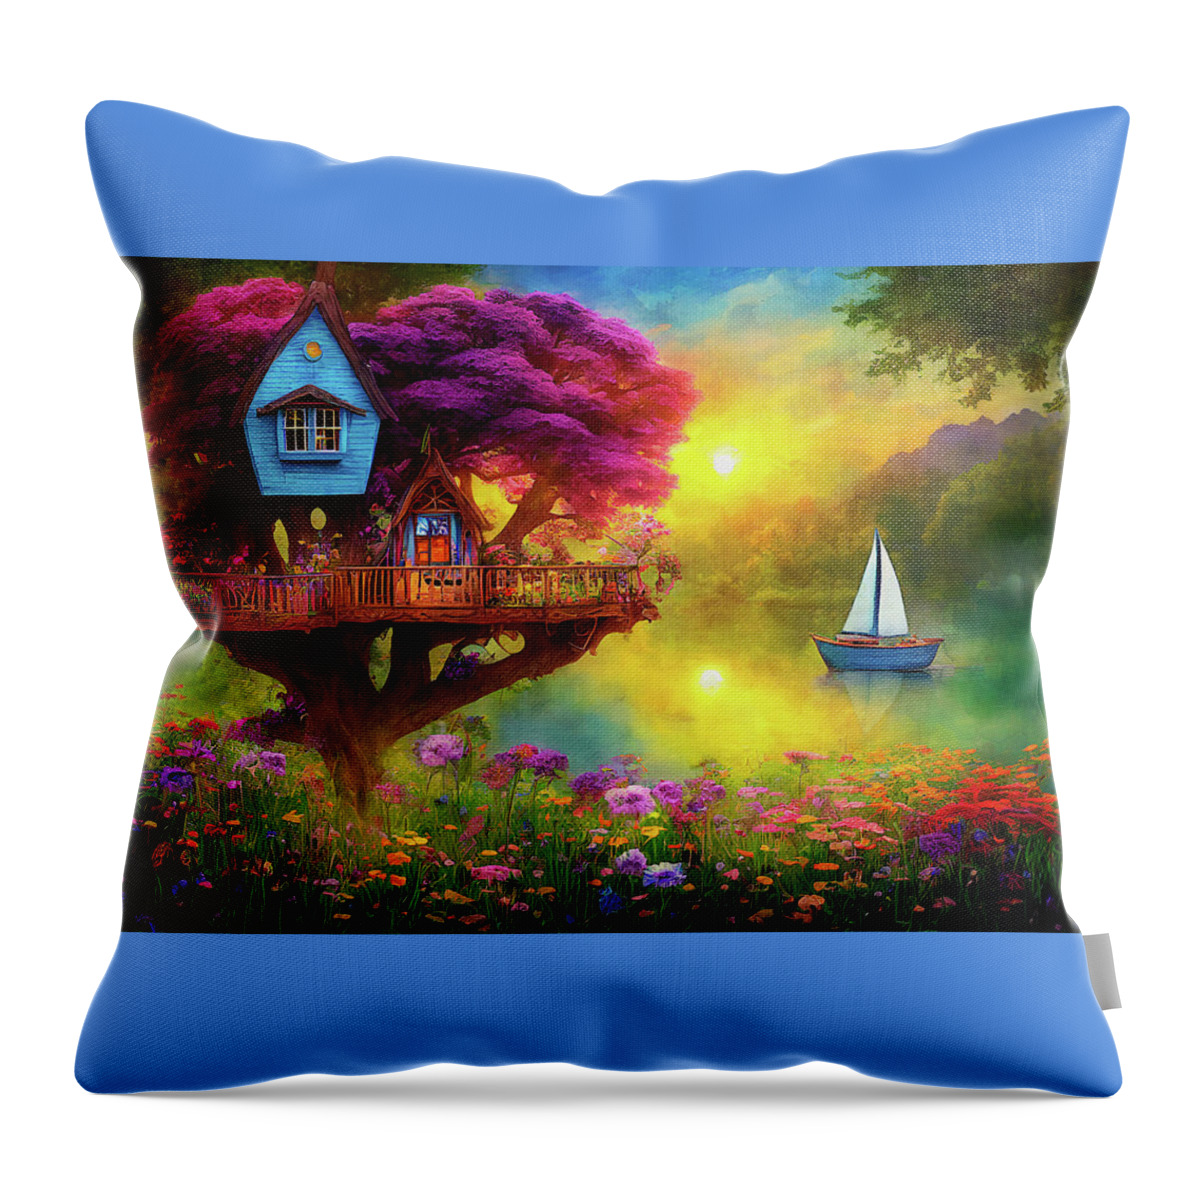 Tree House Throw Pillow featuring the digital art Sailing by My Summer Tree House by Peggy Collins